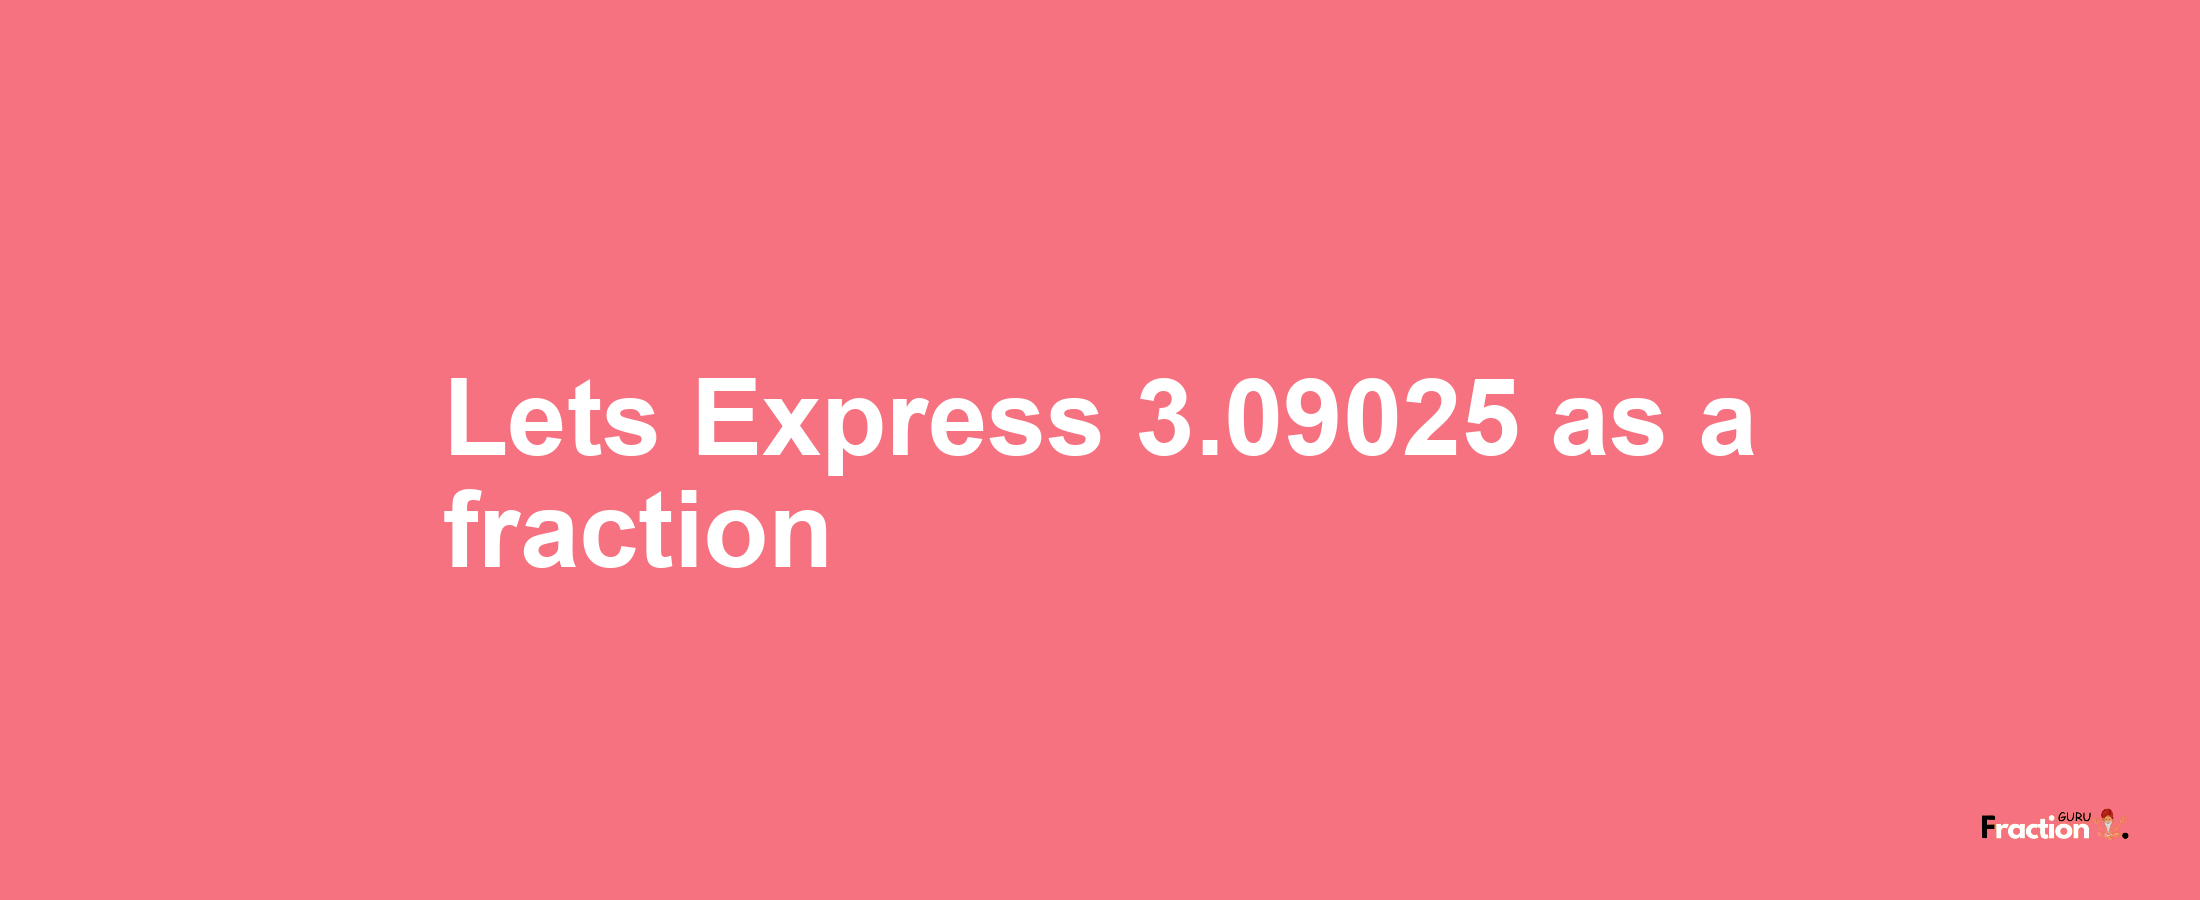 Lets Express 3.09025 as afraction